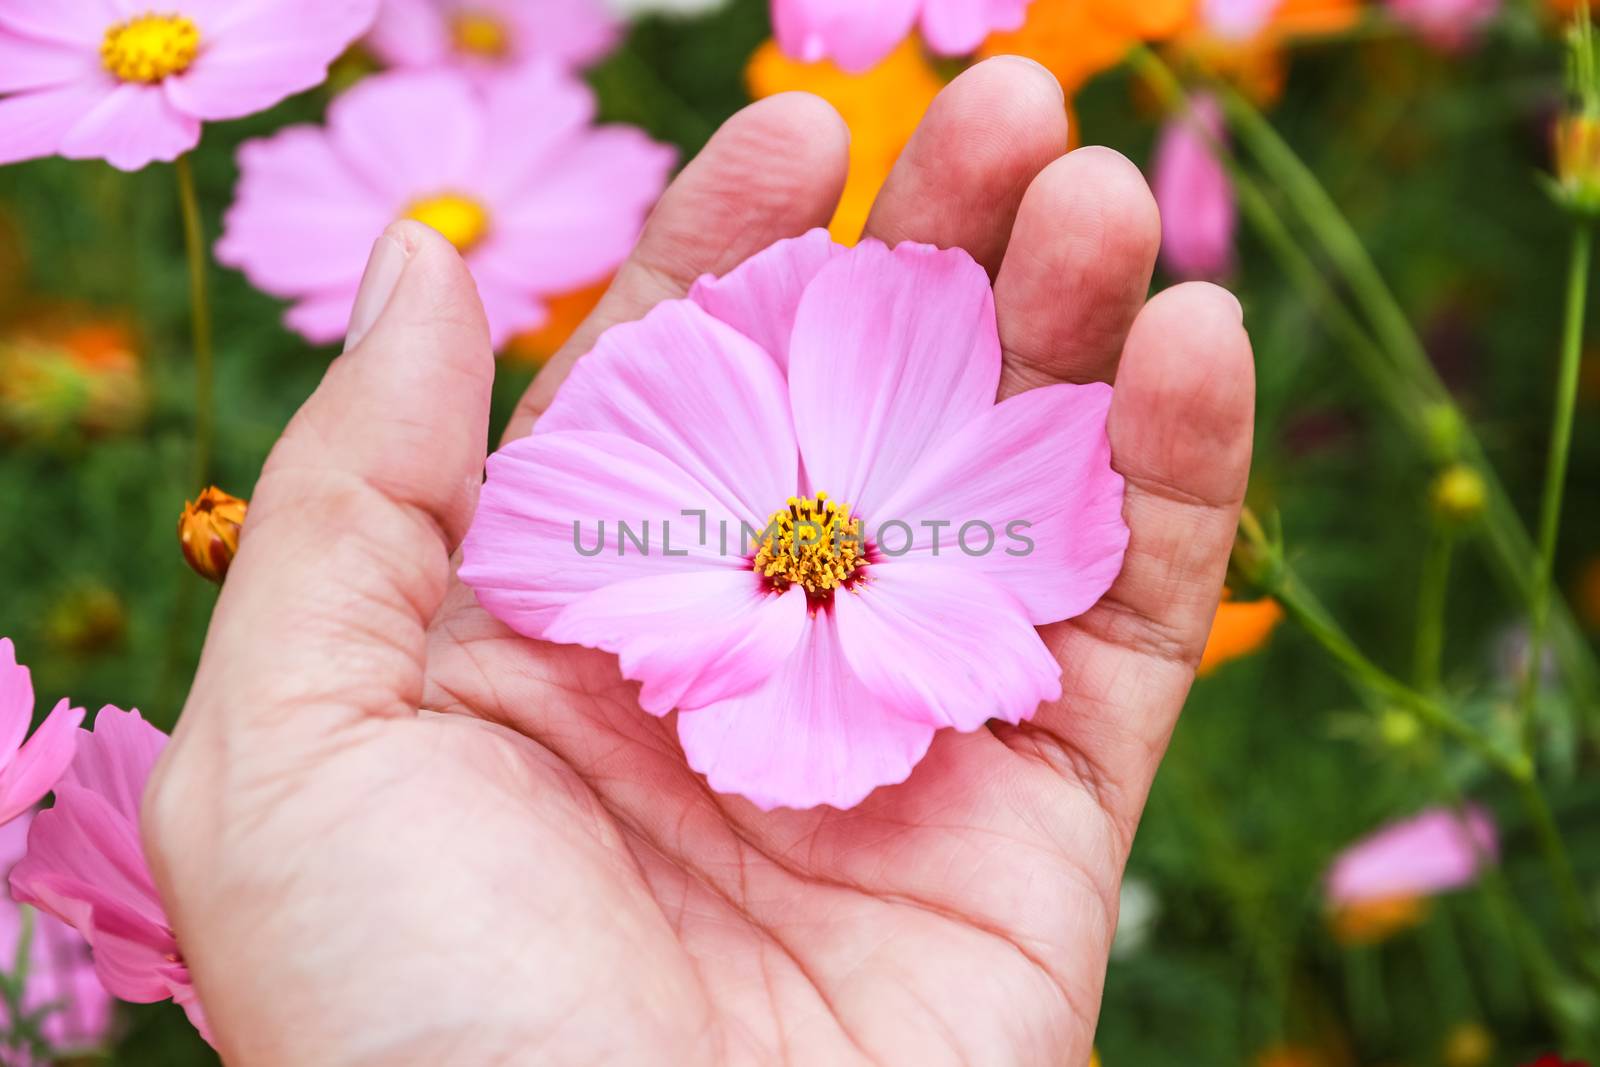 Colorful cosmos flower blooming in the field, on hand with care and gentle touch